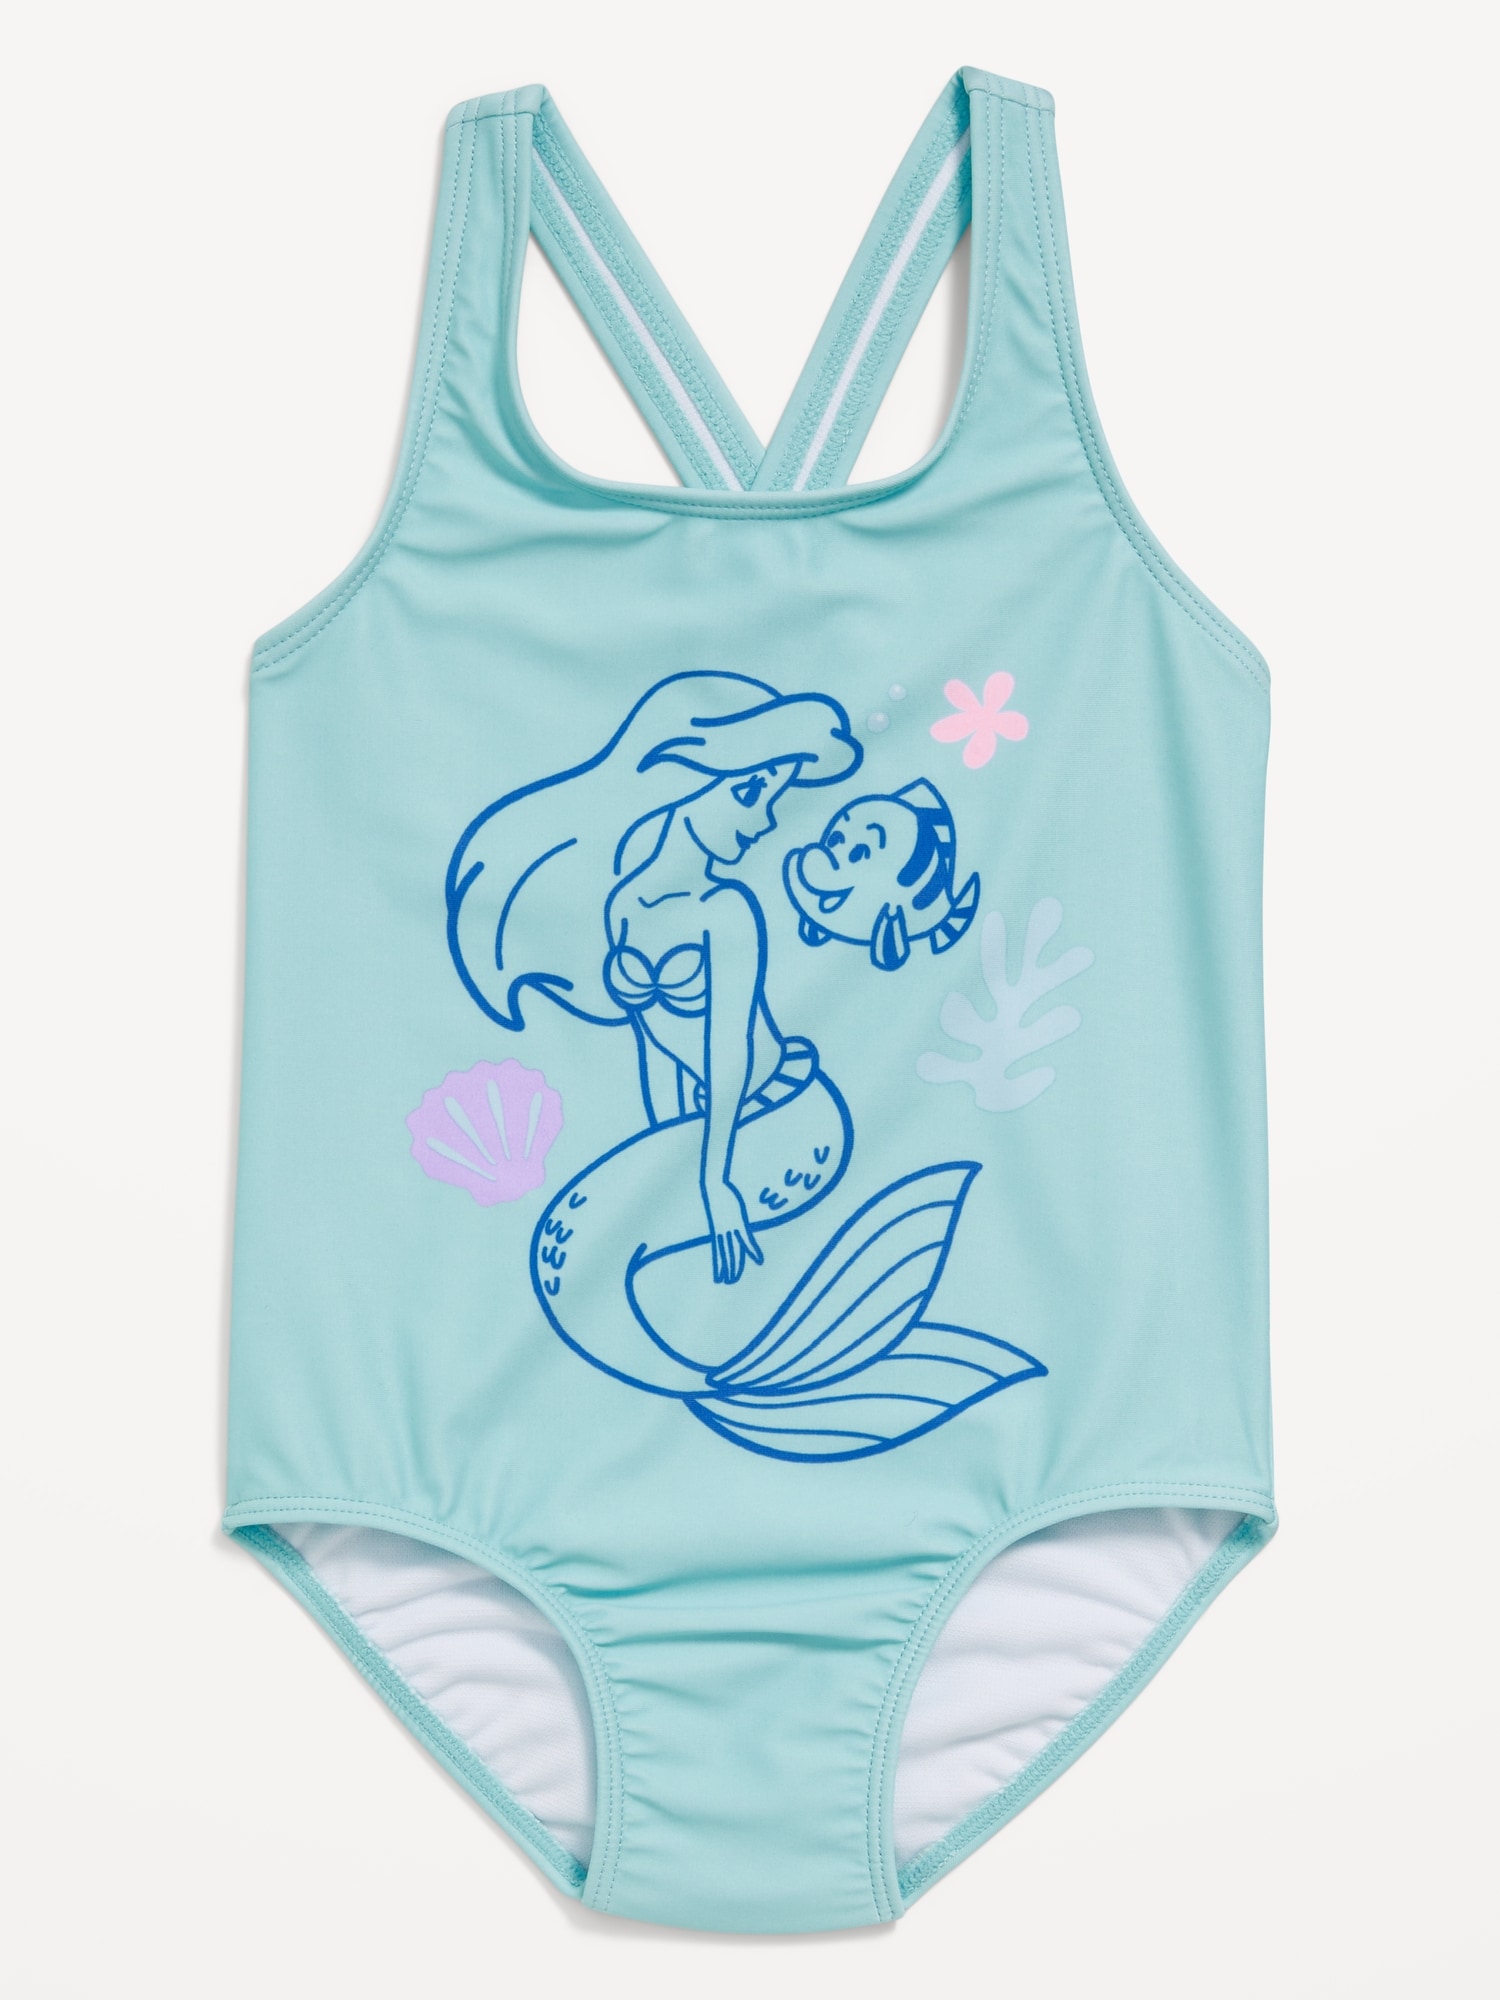 Disney Graphic One-Piece Swimsuit for Toddler Girls